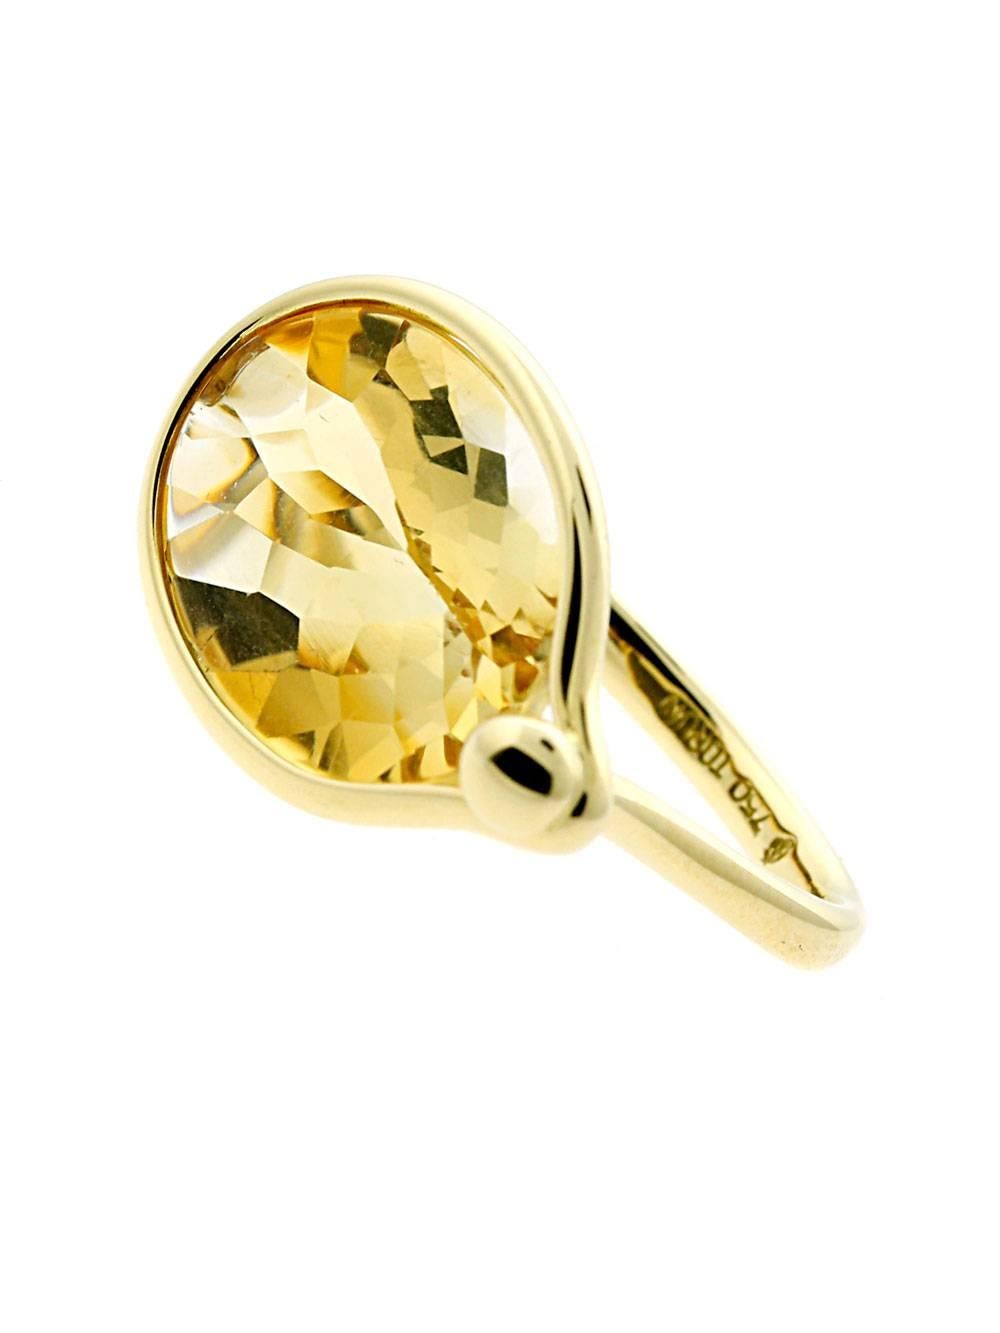 An authentic Georg Jensen ring featuring a gold hued citrine set in 18k yellow gold.

Size: US 5
Dimensions: 15mm wide (.59″ wide)

Inventory ID: 0000302